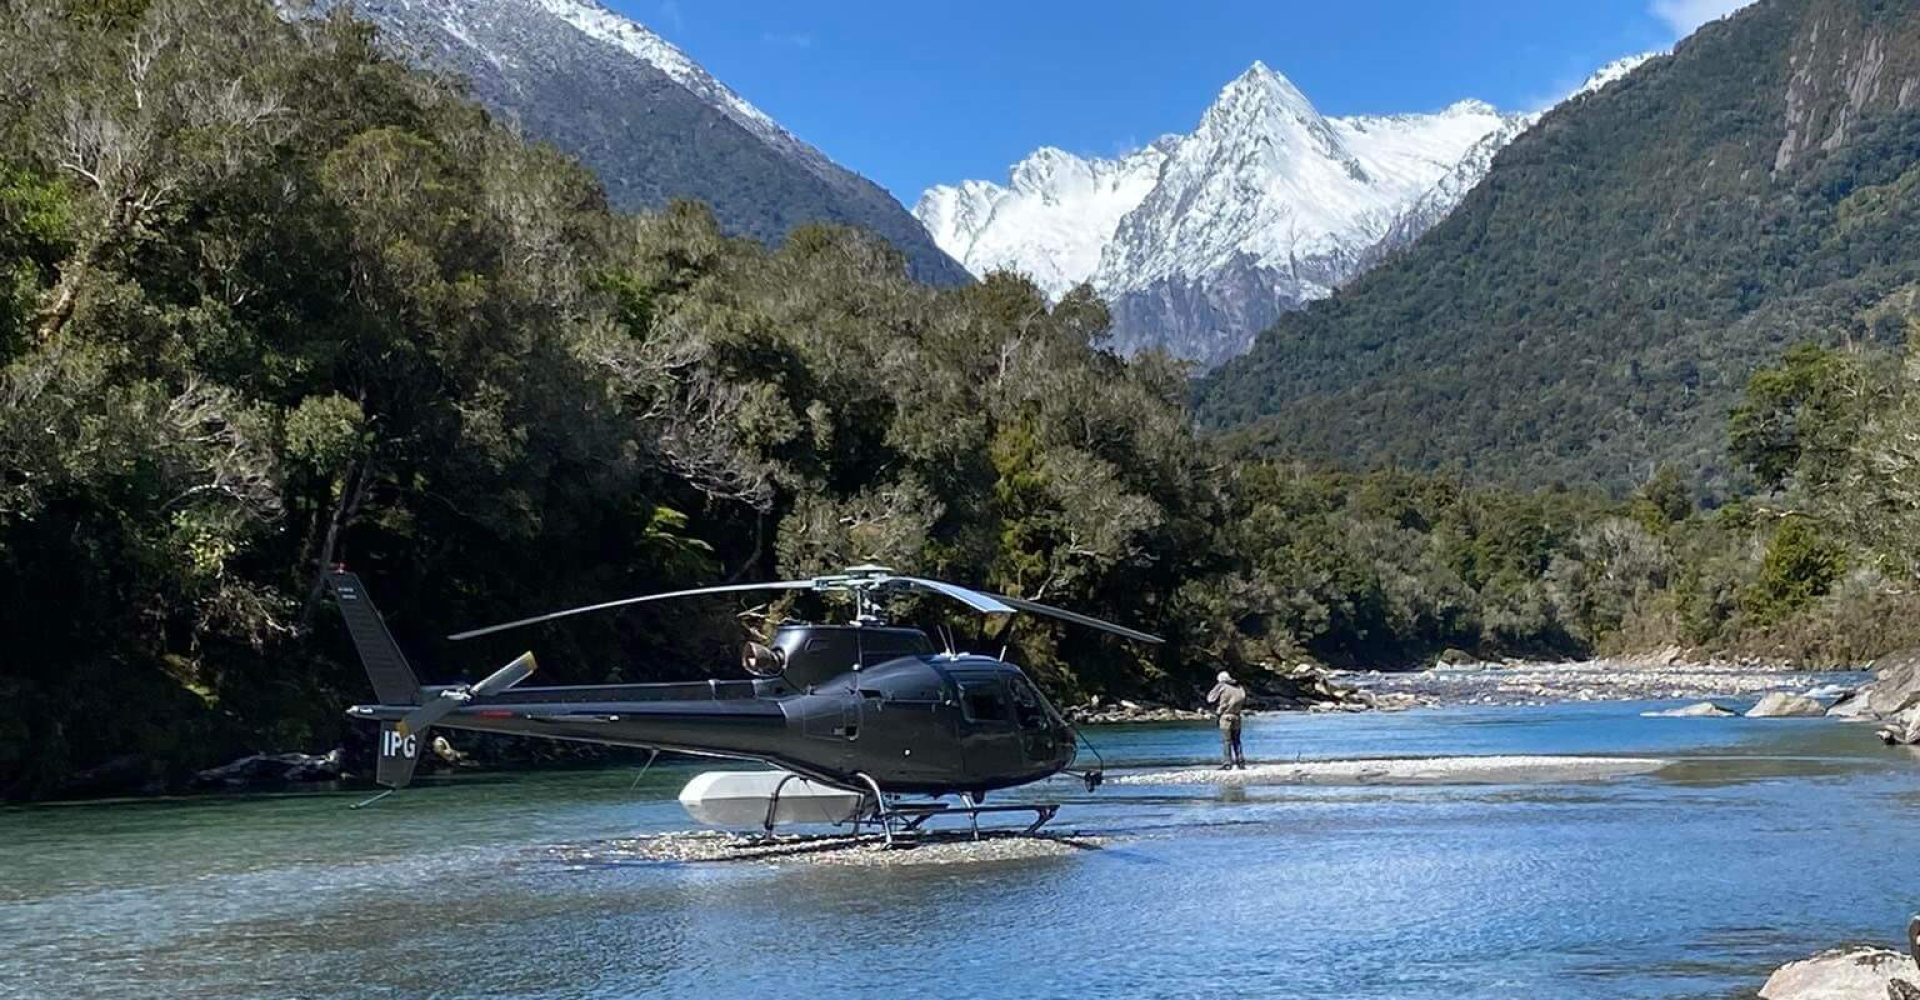 Backcuntry Helicopters Fishing Charters Wanaka Makarora Queenstown